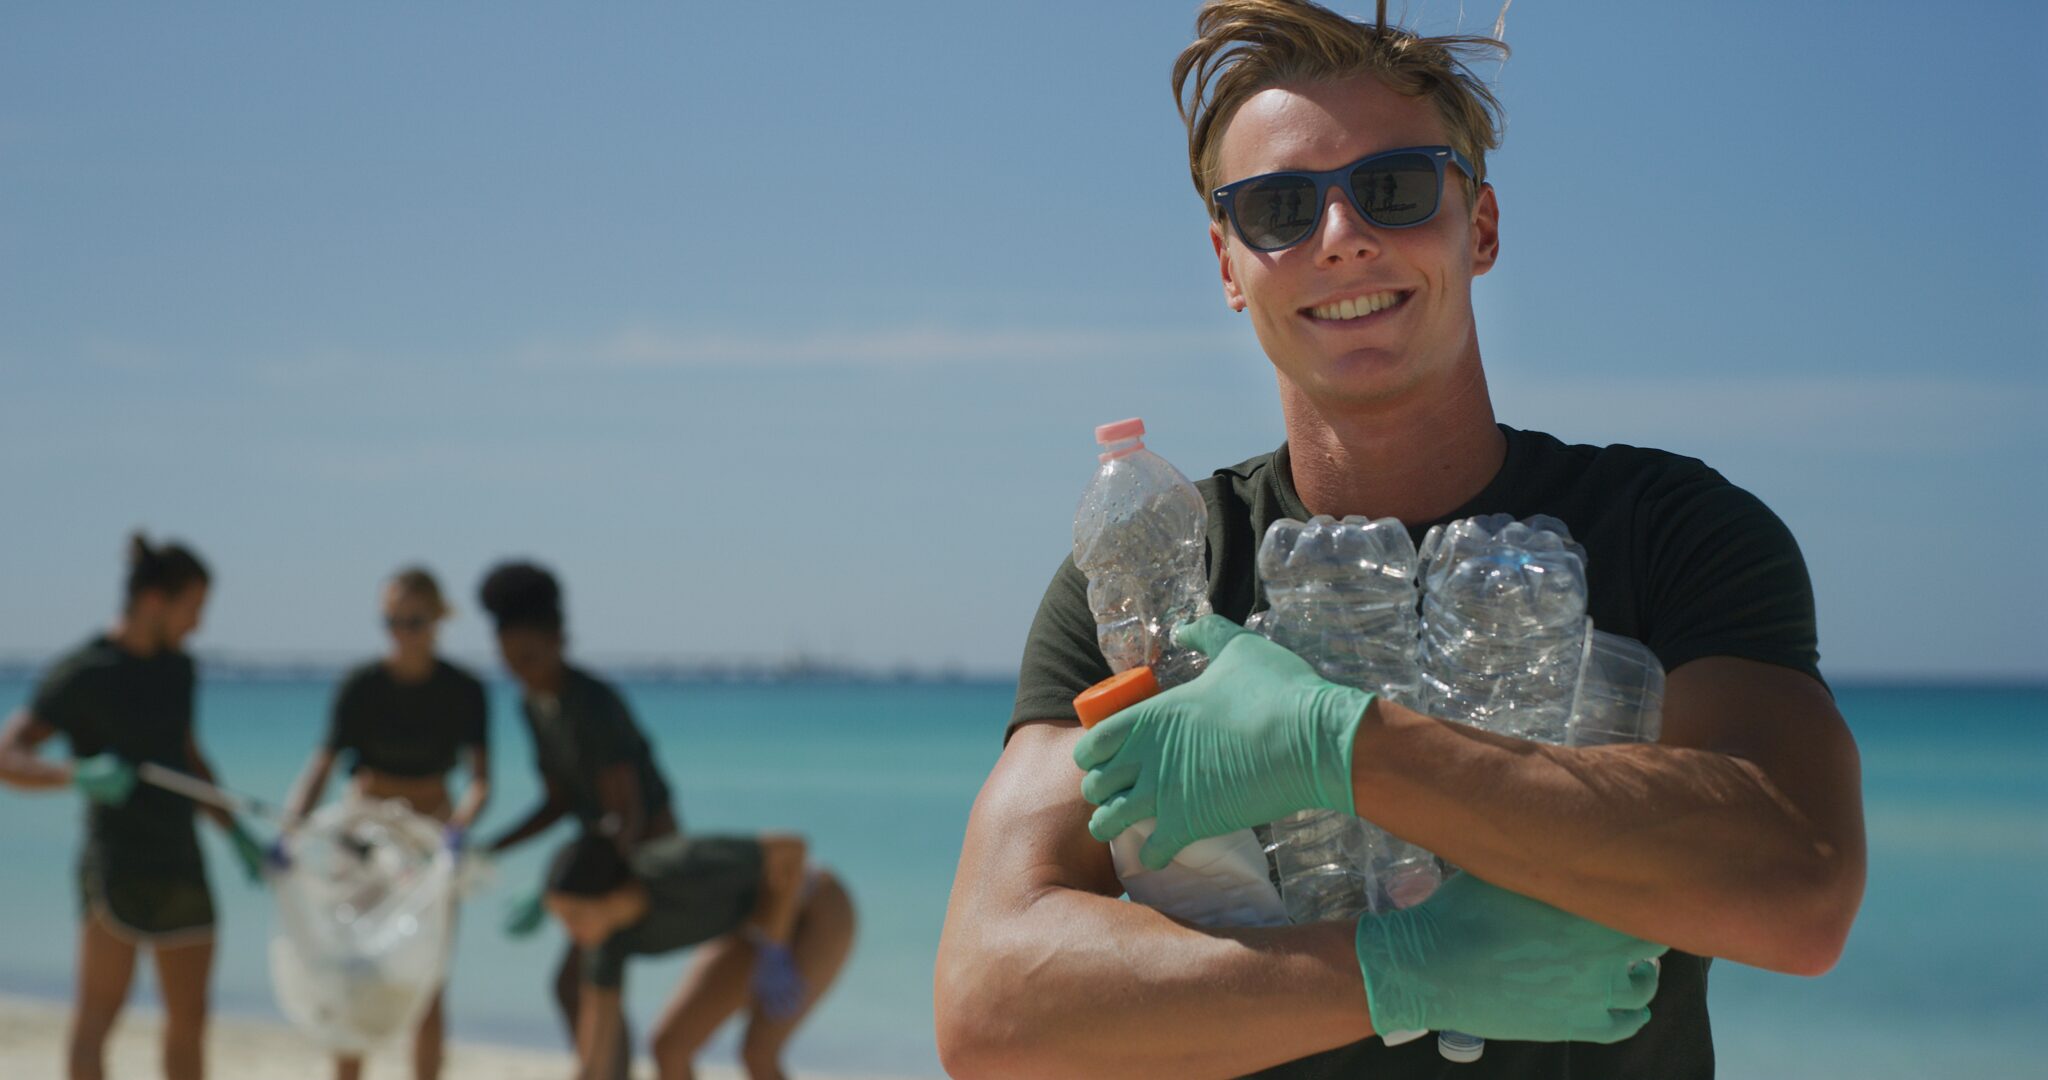 A young man in sunglasses cleans up plastic from a beach for citizen science